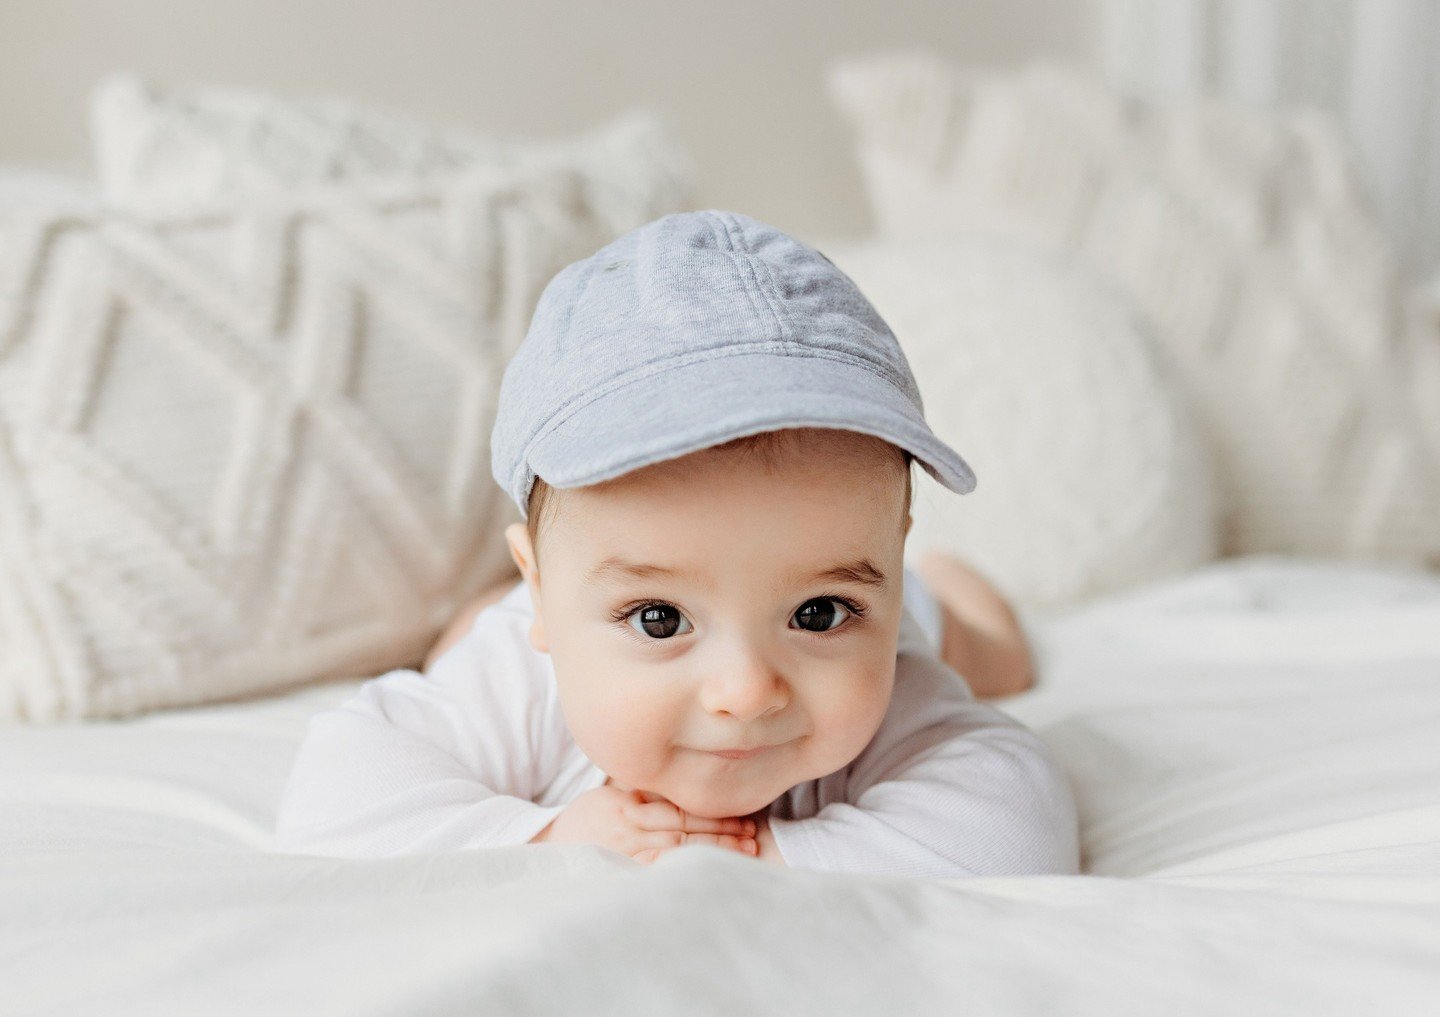 Mom brought in this adorable little hat, and I love all the little faces he was making for his photos. Clean, simple and timeless images. My favorites!⁠
⁠
⁠
⁠
⁠
⁠
⁠
#bostonbabyphotographer #bostonfamilyphotographer #bostonbabyphotos #bostonfamilyphot